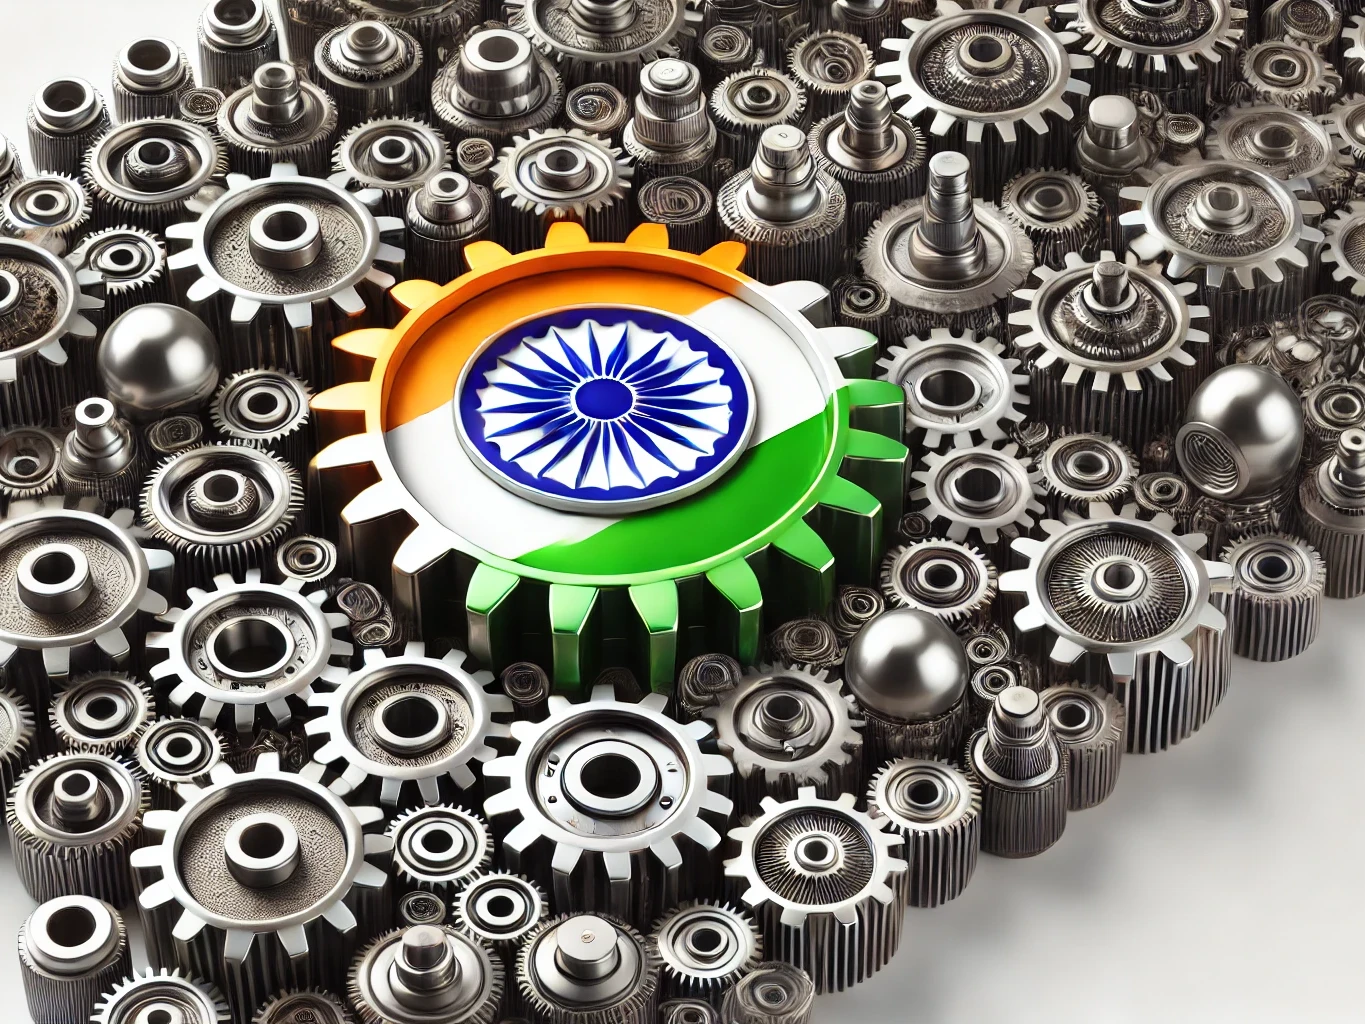 manufacturing and Indian flag